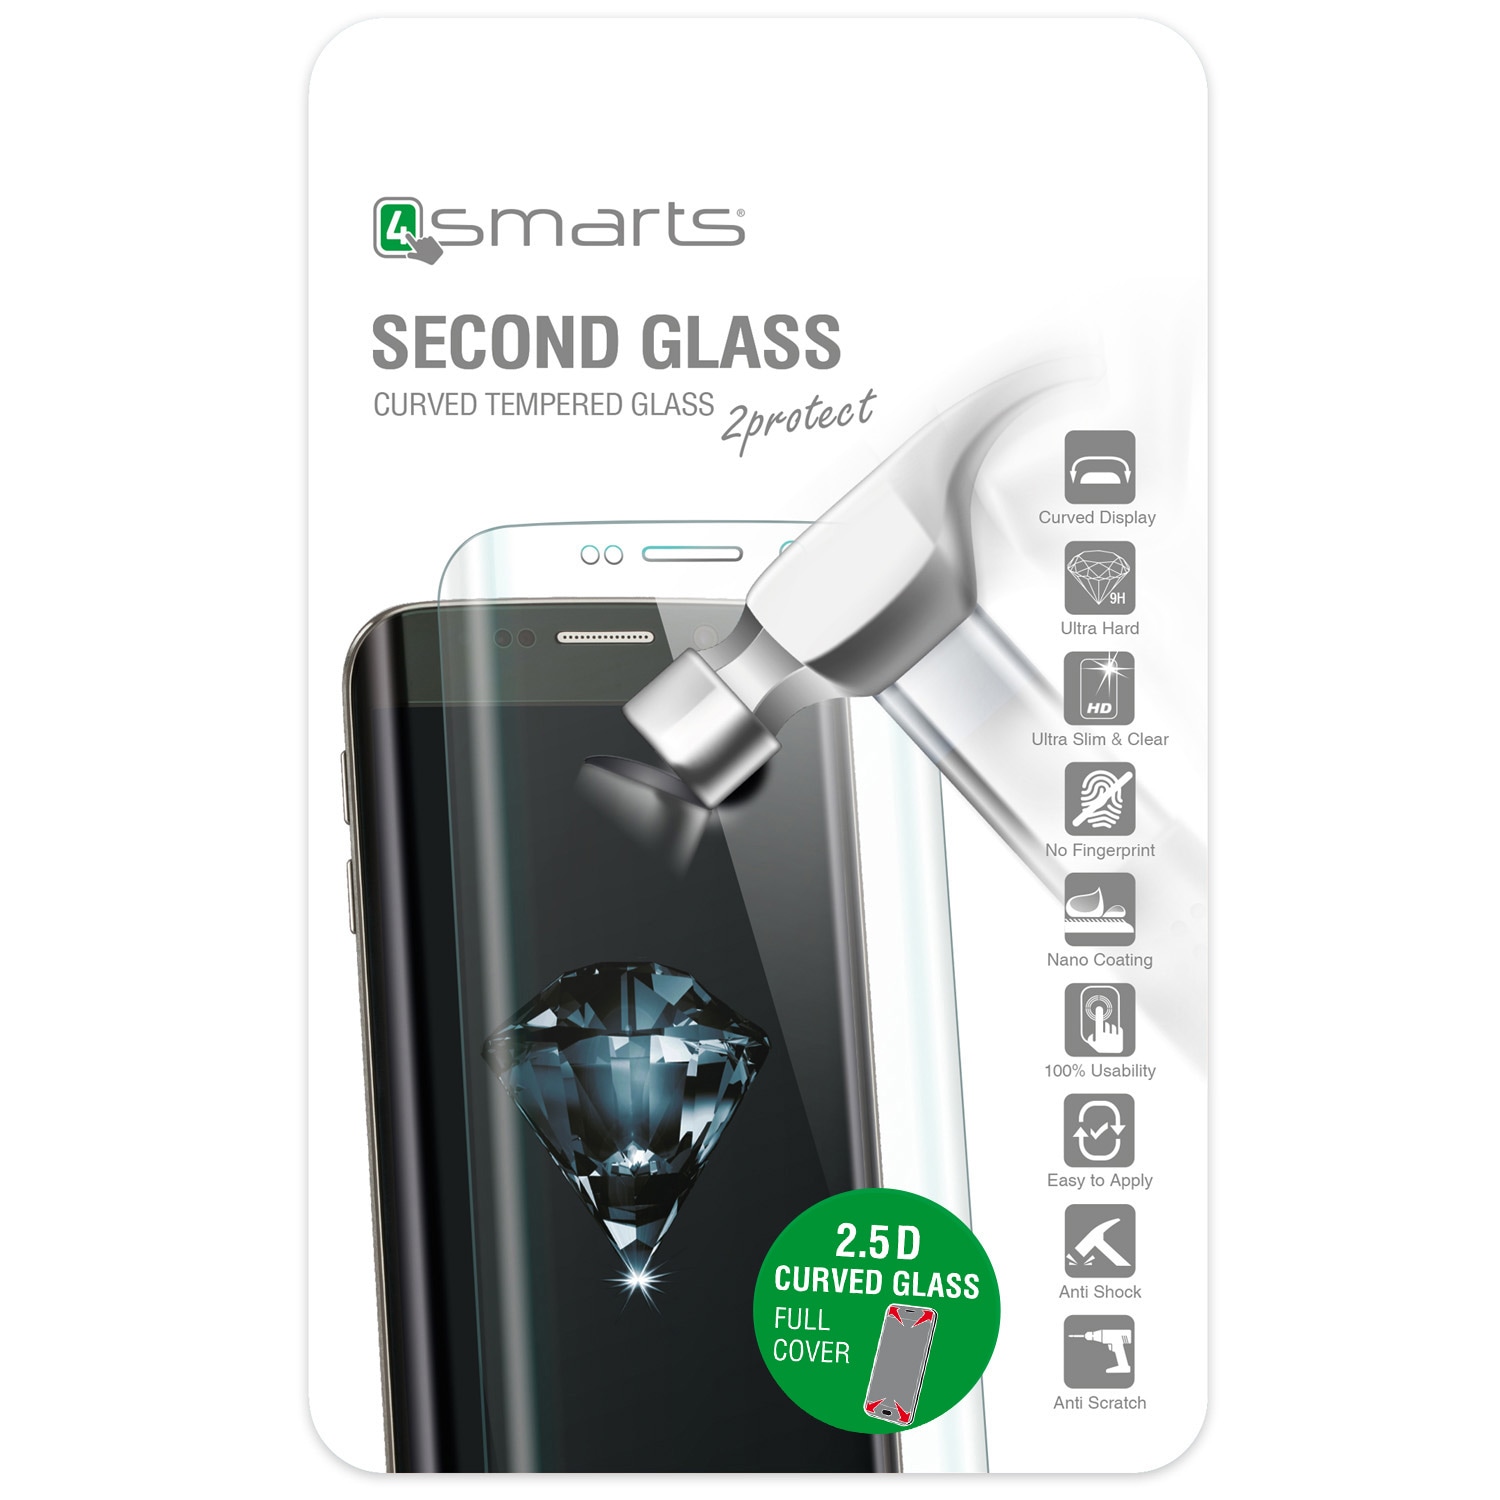 4smarts Second Glass Curved 2.5D iPhone 6 / 6S - Musta